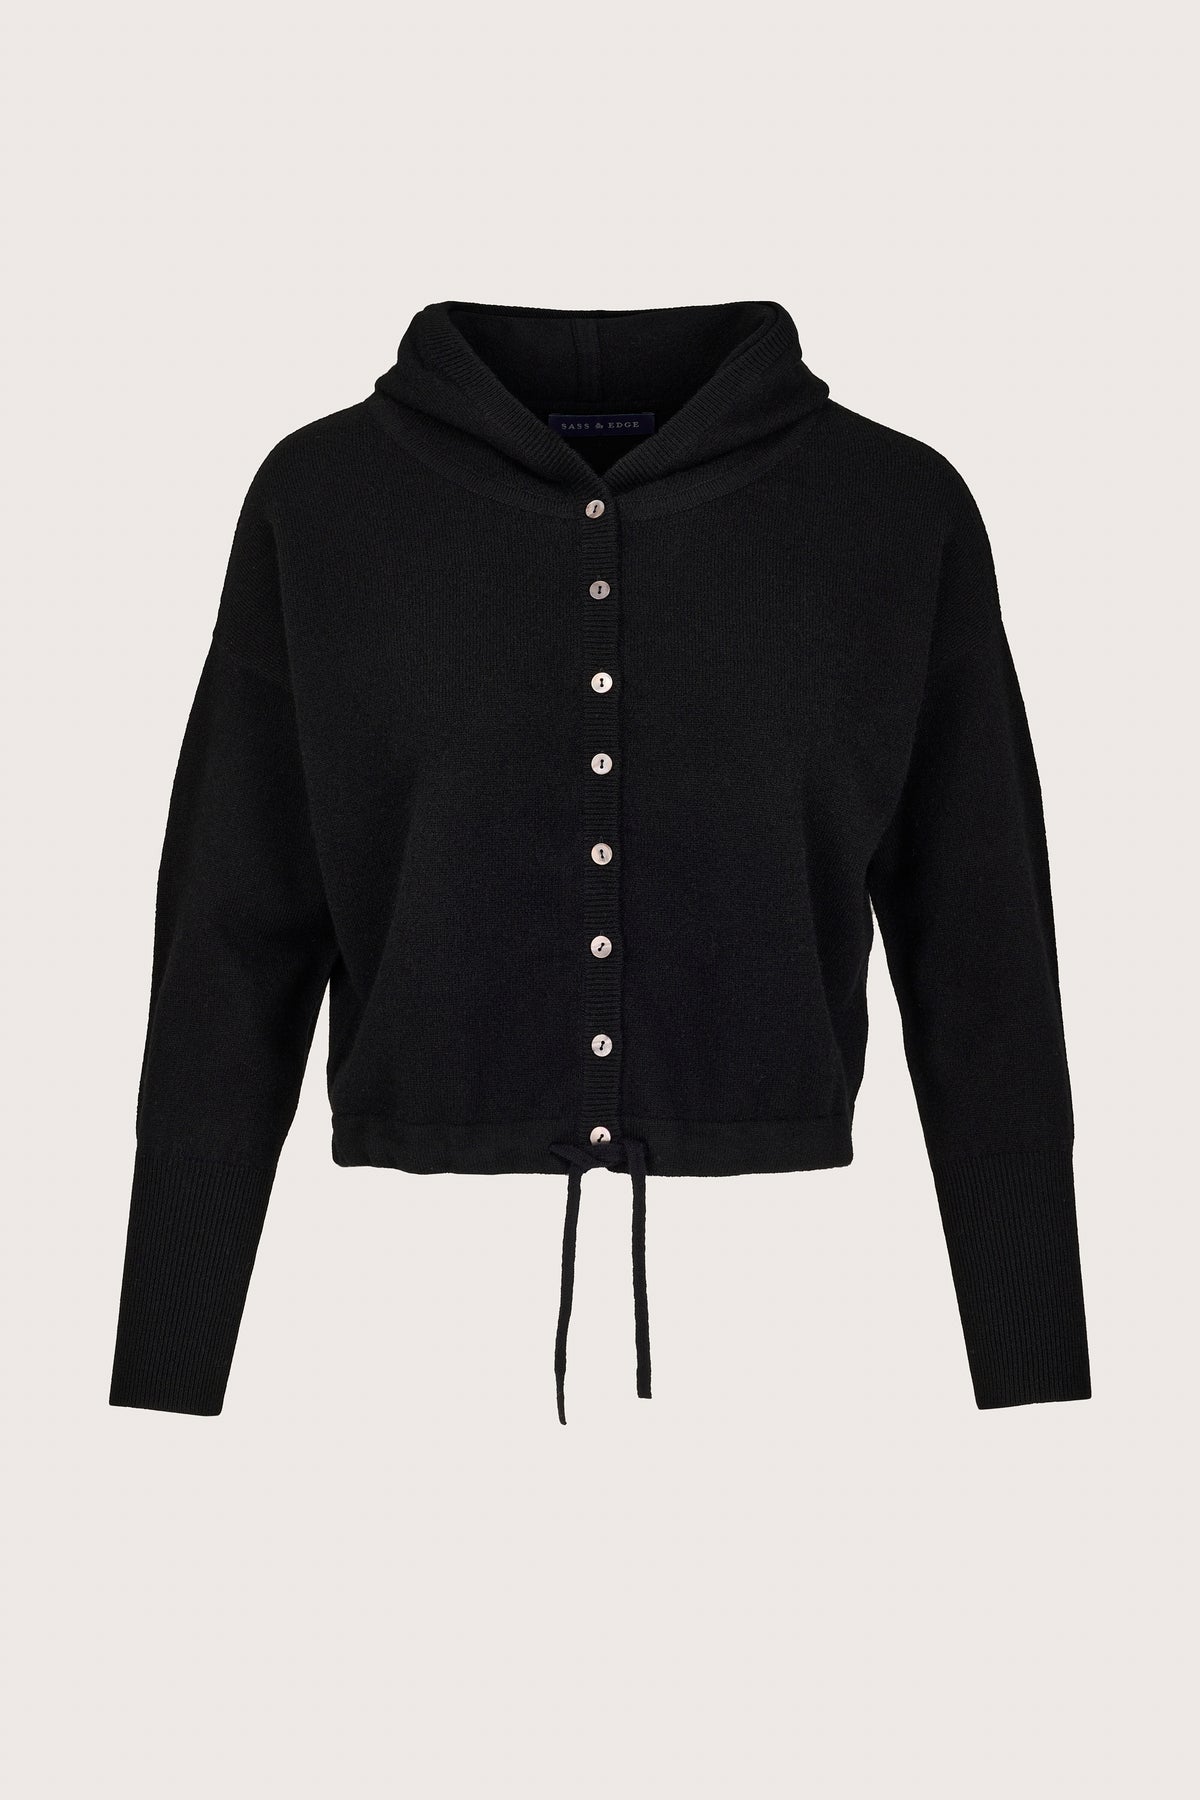 black boxy and cropped button through hoodie top